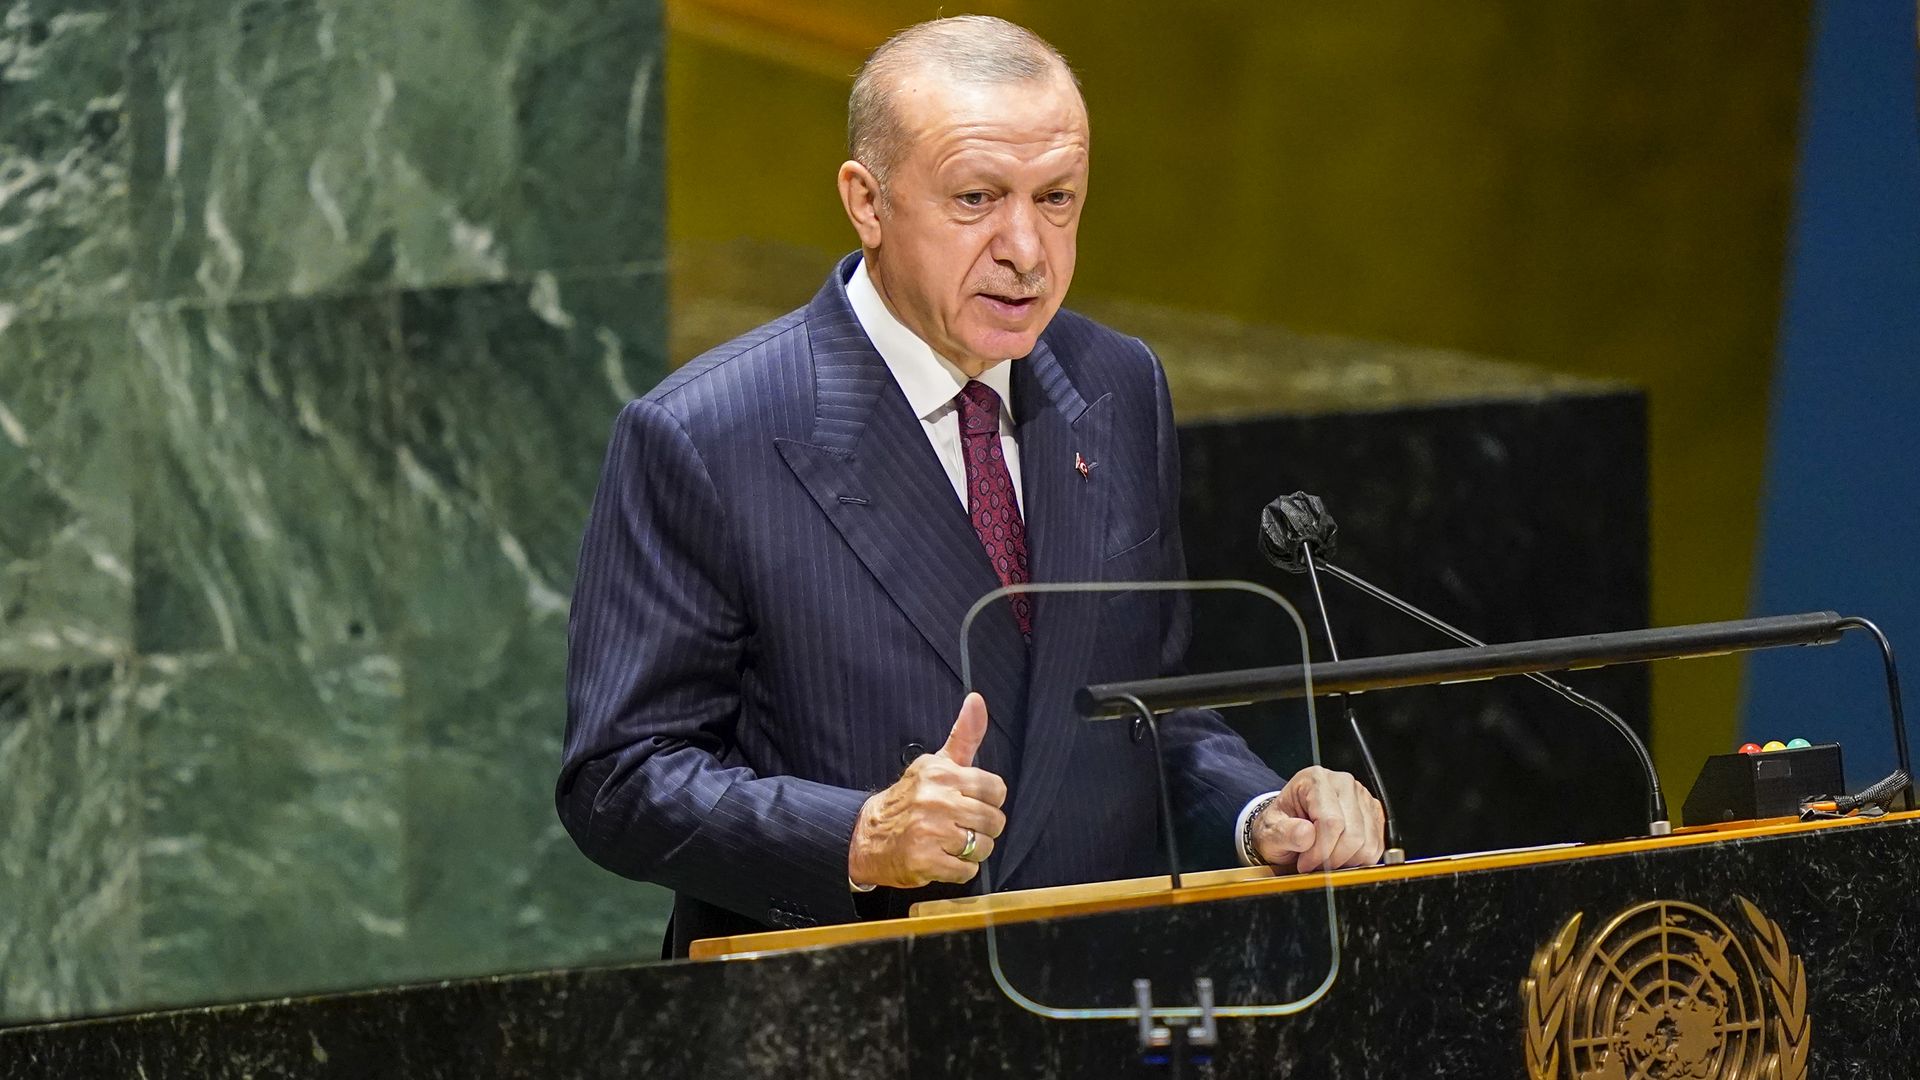 Turkish President Recep Tayyip Erdoğan speaks during the annual gathering in New York City for the 76th session of the United Nations General Assembly (UNGA) on September 21, 2021 